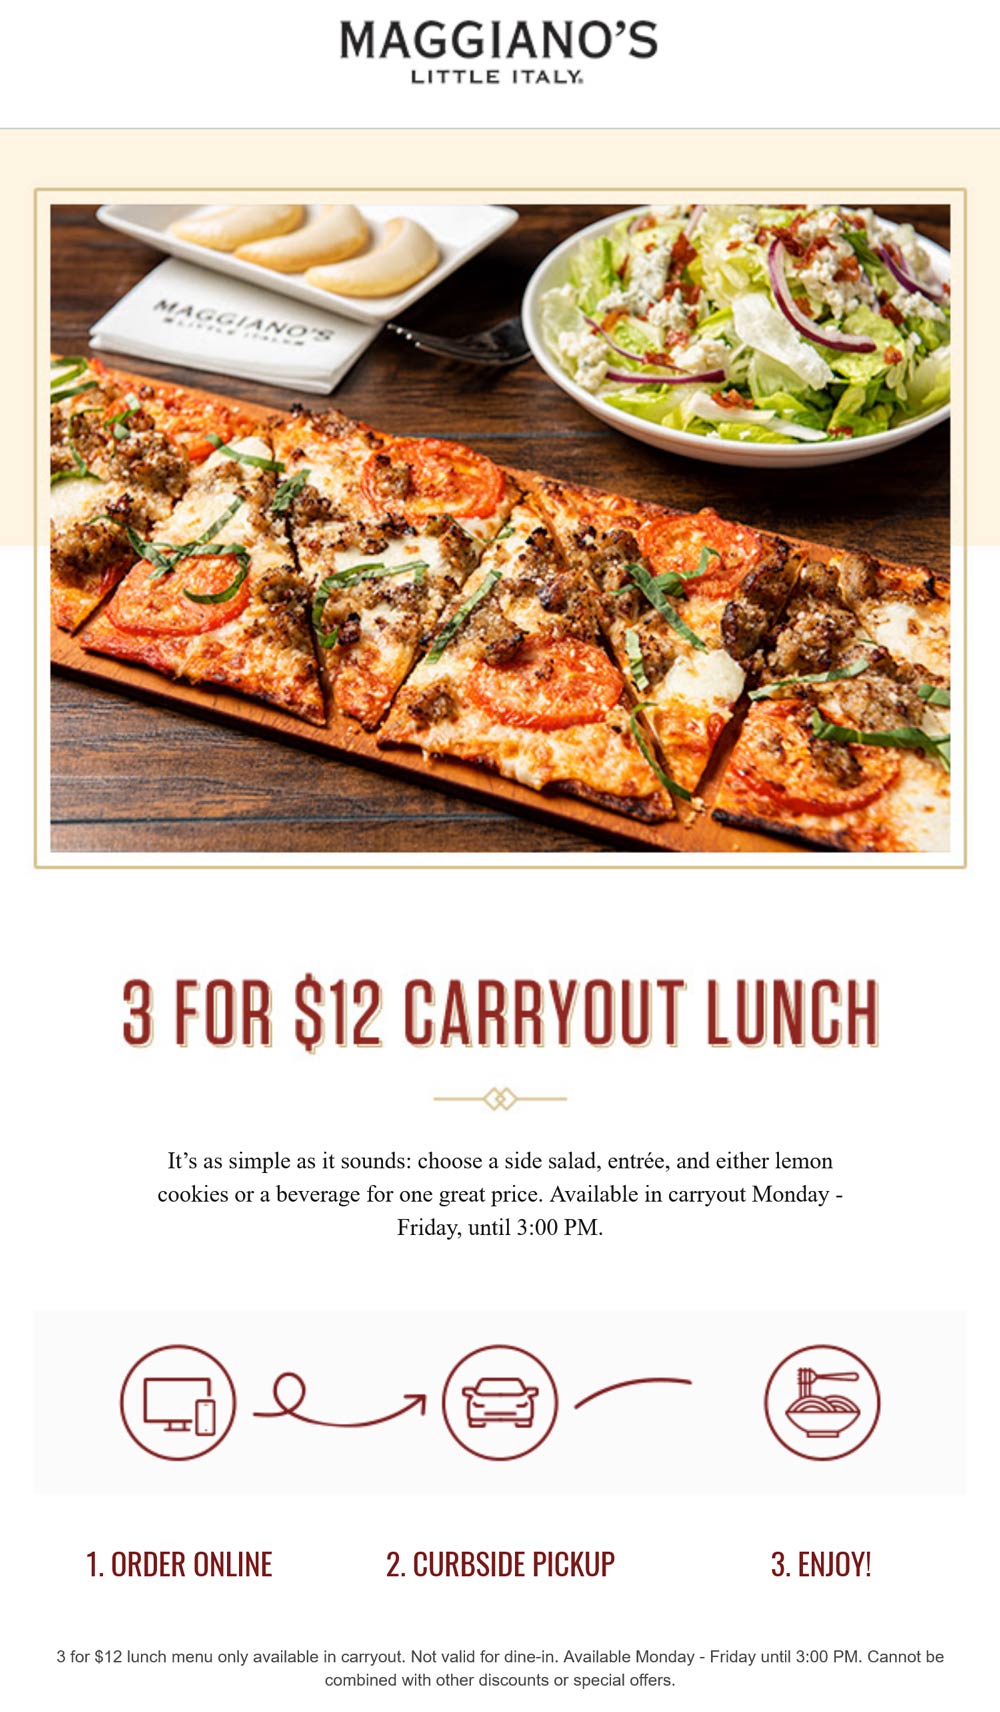 Maggianos Little Italy restaurants Coupon  Salad + entree + cookies or drink = $12 lunch carryout weekdays at Maggianos Little Italy #maggianoslittleitaly 